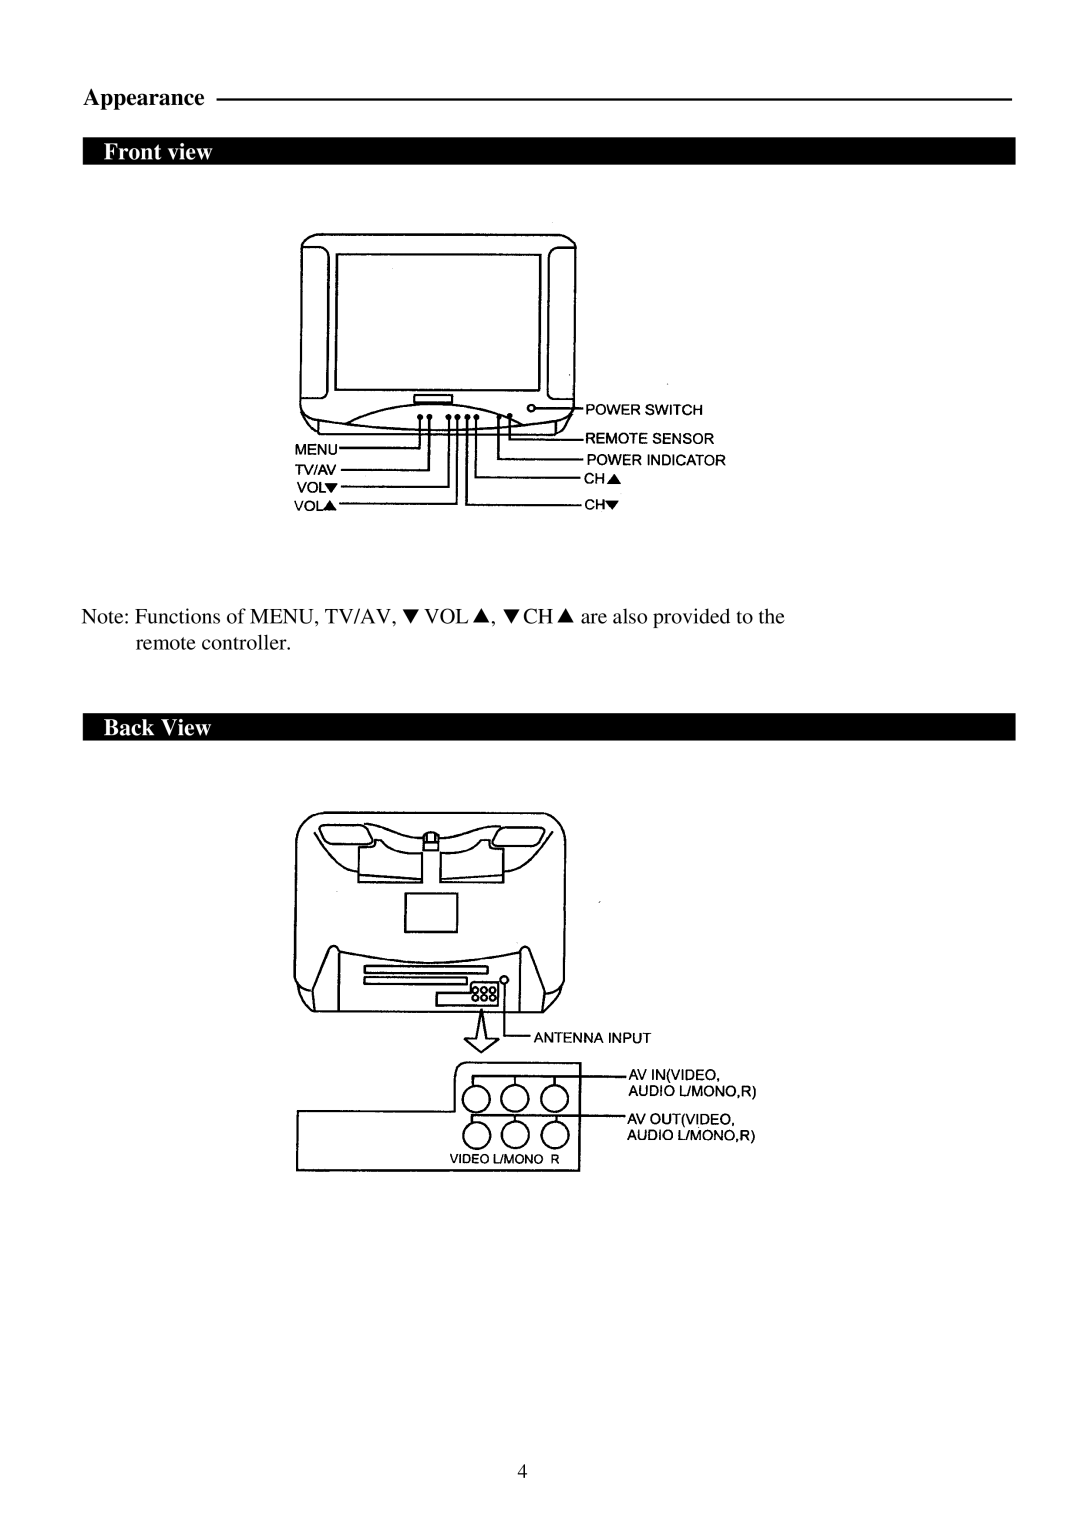 Palsonic 3410P owner manual Appearance, Front view, Back View 